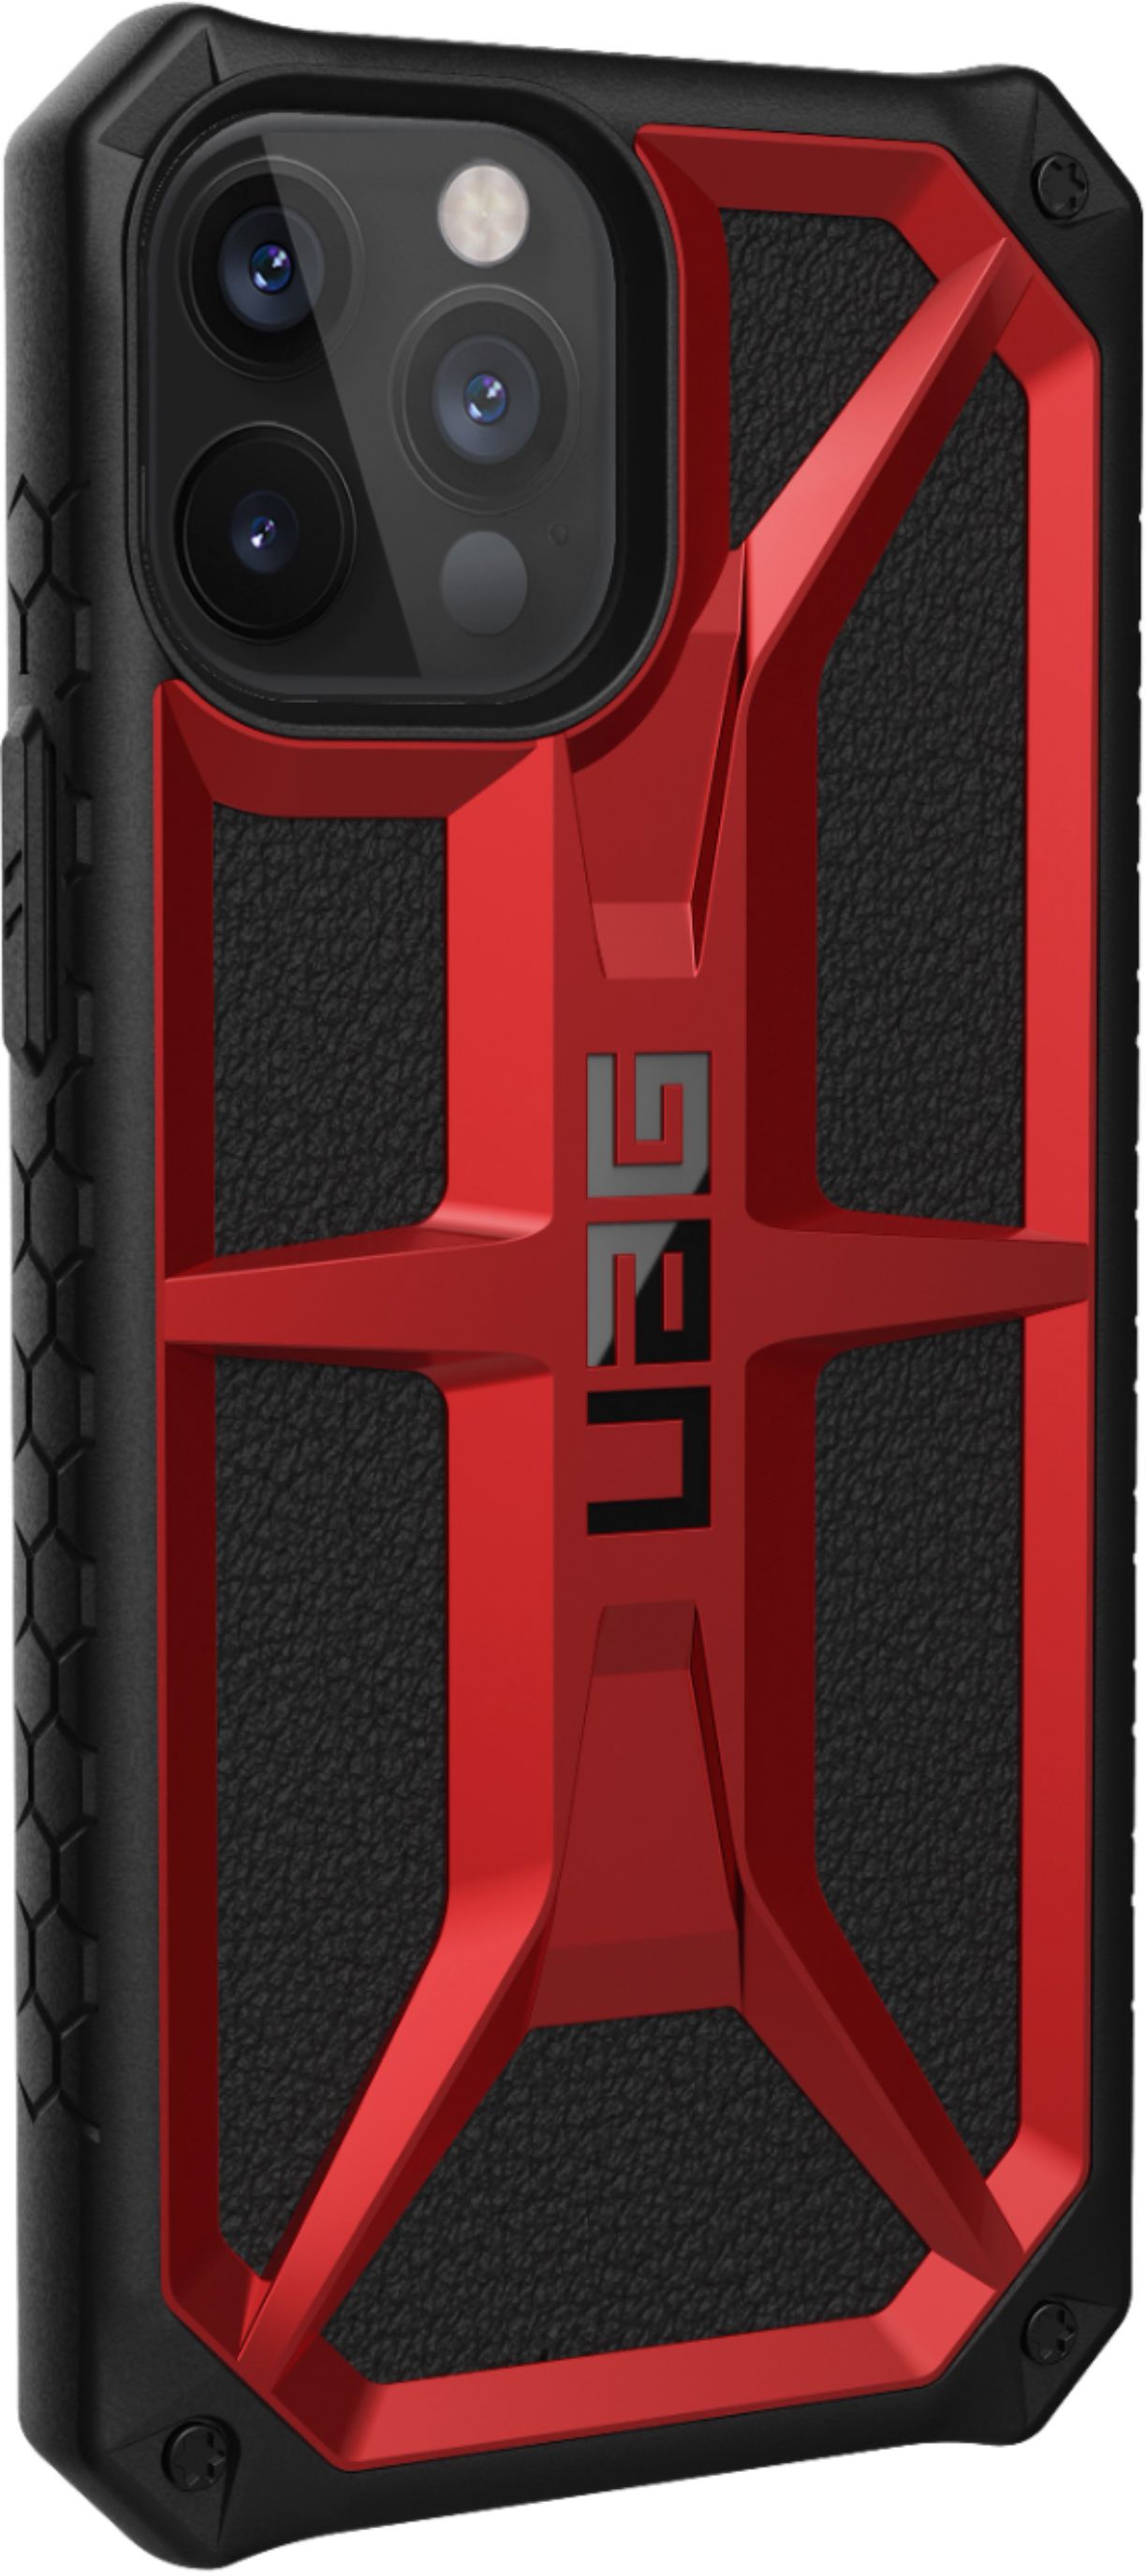 Left View: UAG - Monarch Series Hard shell Case for iPhone 12 Pro Max - Monarch